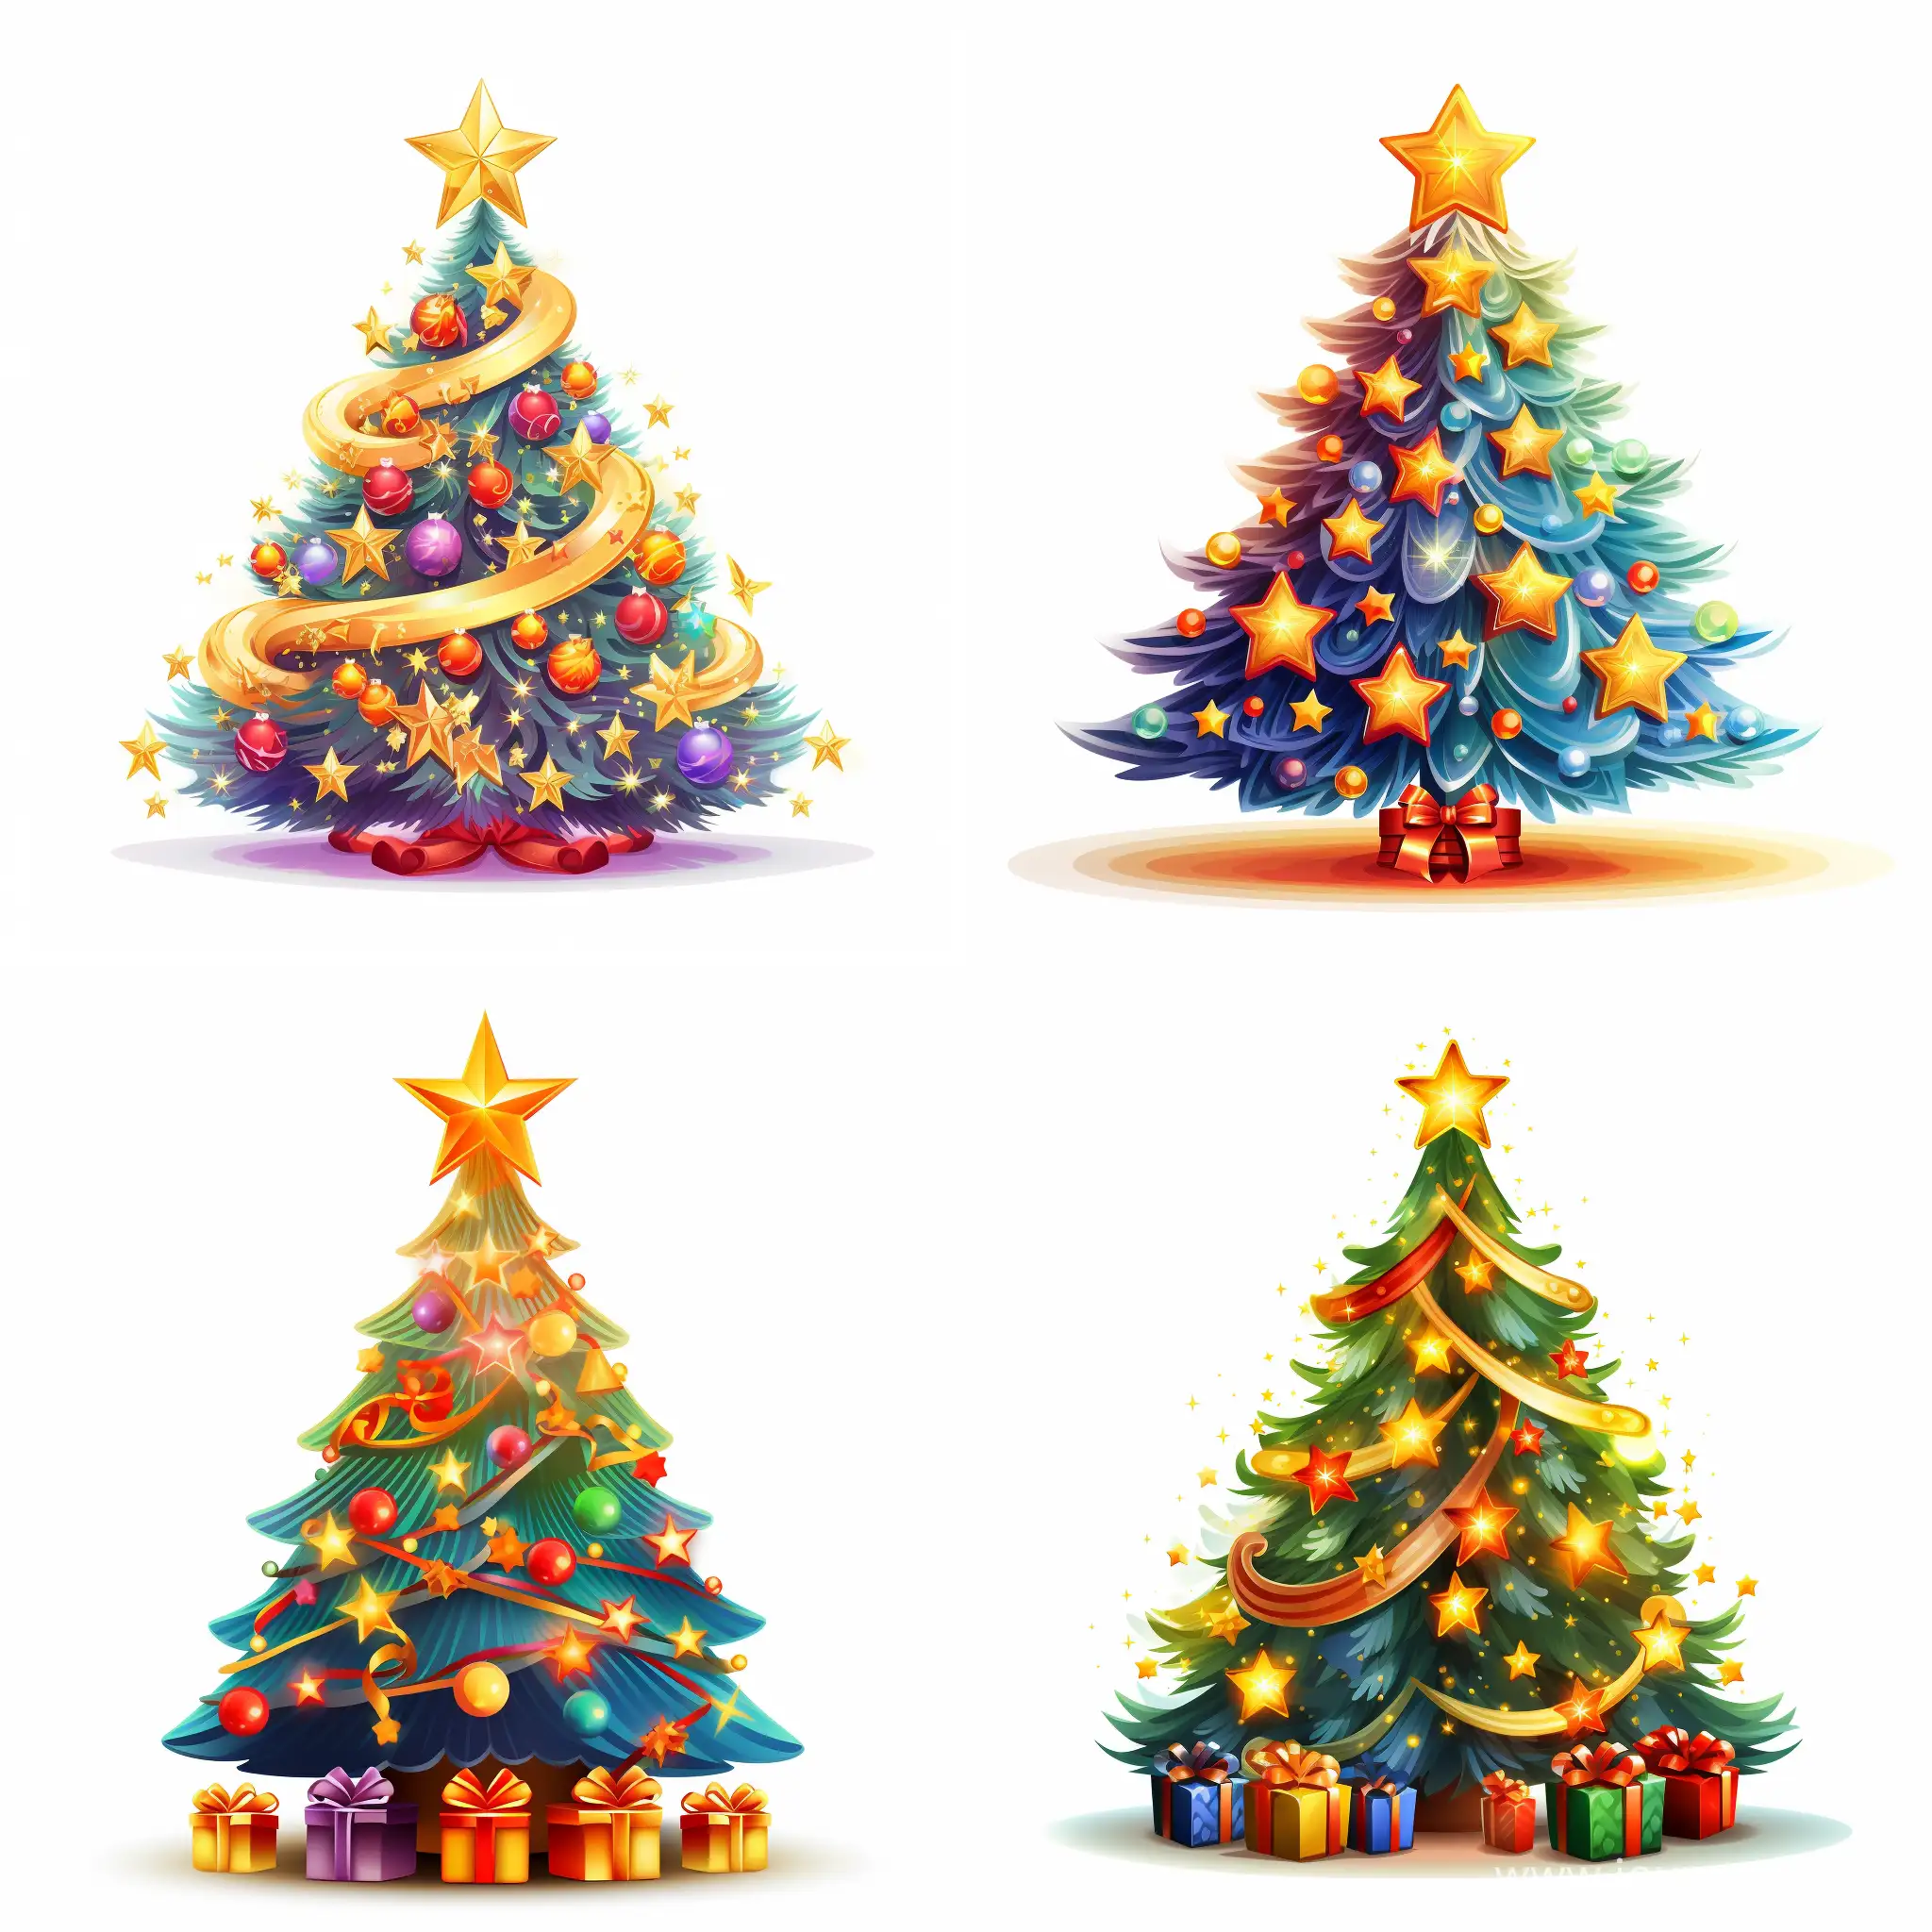 vector illustration, bright lighting, festive, a charming Christmas tree adorned with colorful ornaments and topped with a glowing star on a clean white background. In a joyful and whimsical style